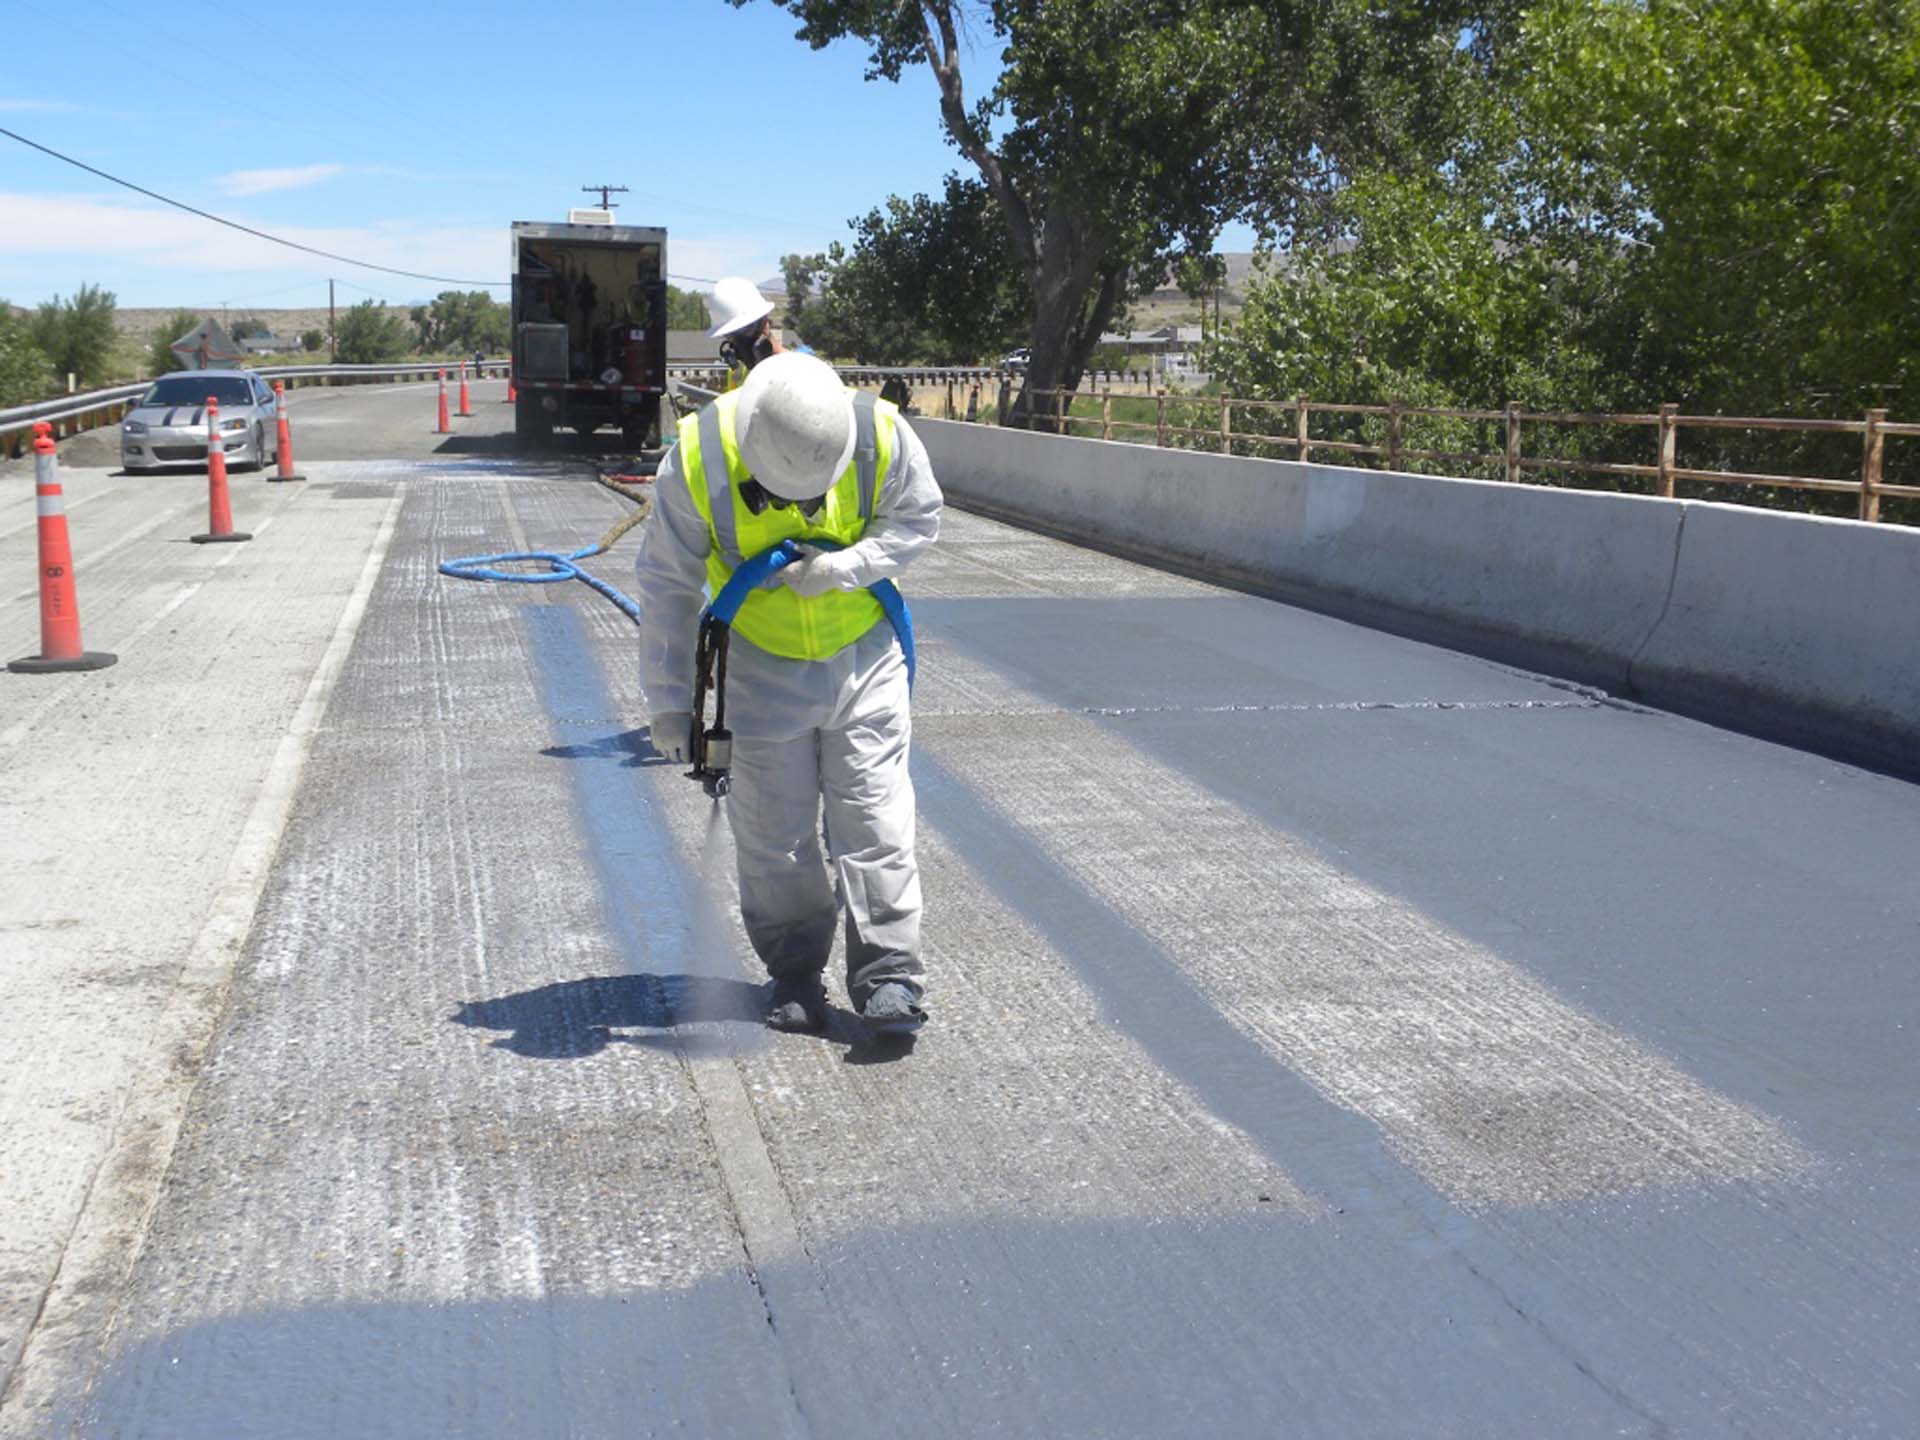 worker wearing a green vest and gray suit spraying a road